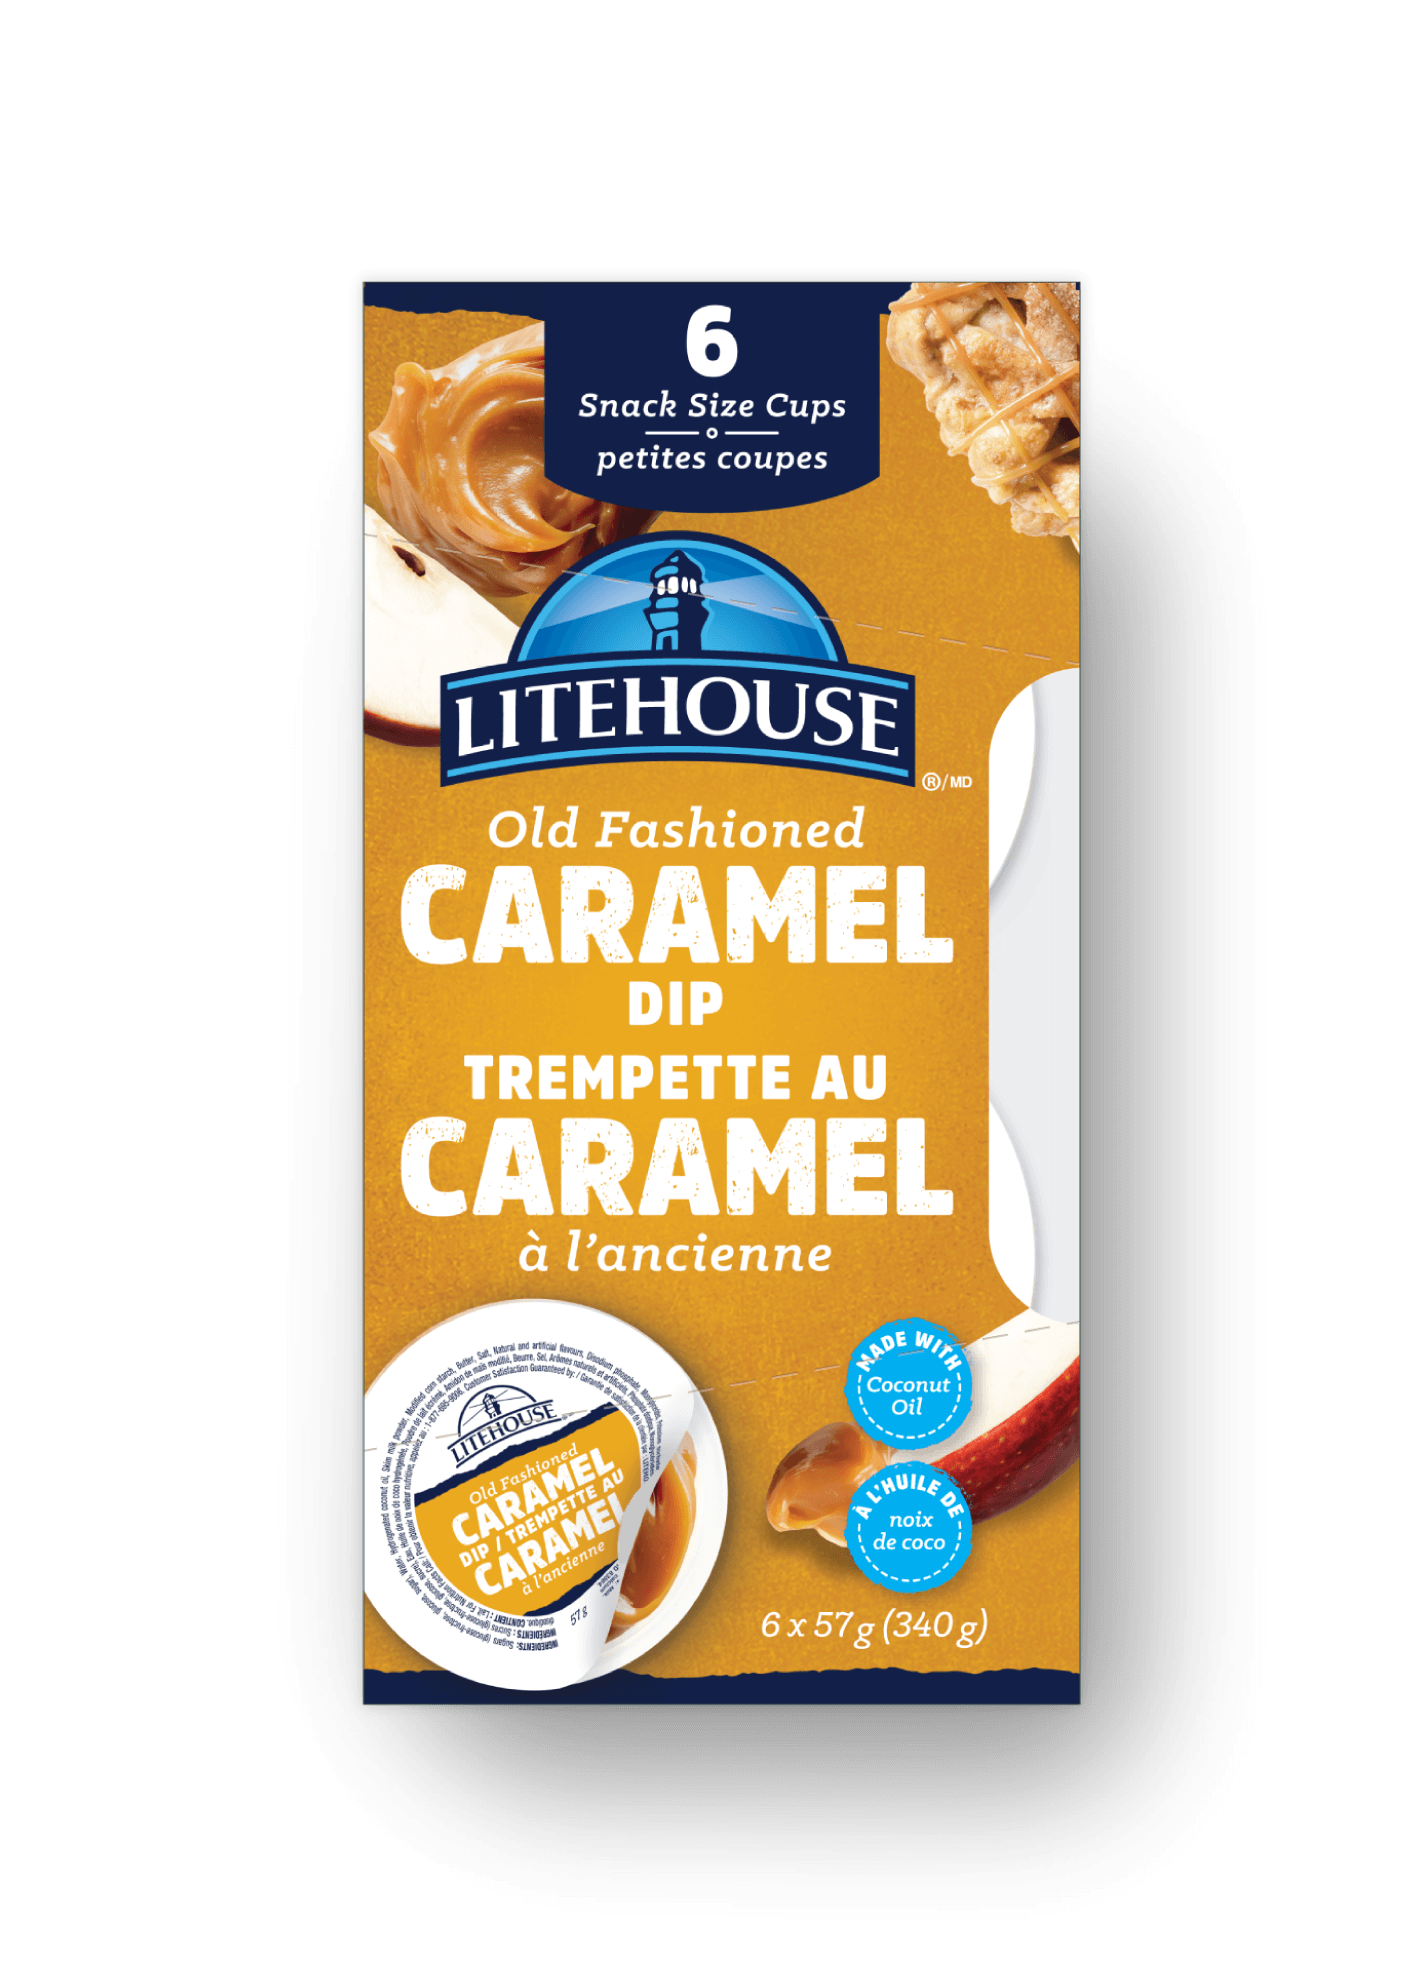 Old Fashioned Caramel Dip - Litehouse - Snack Size 6x2oz cups